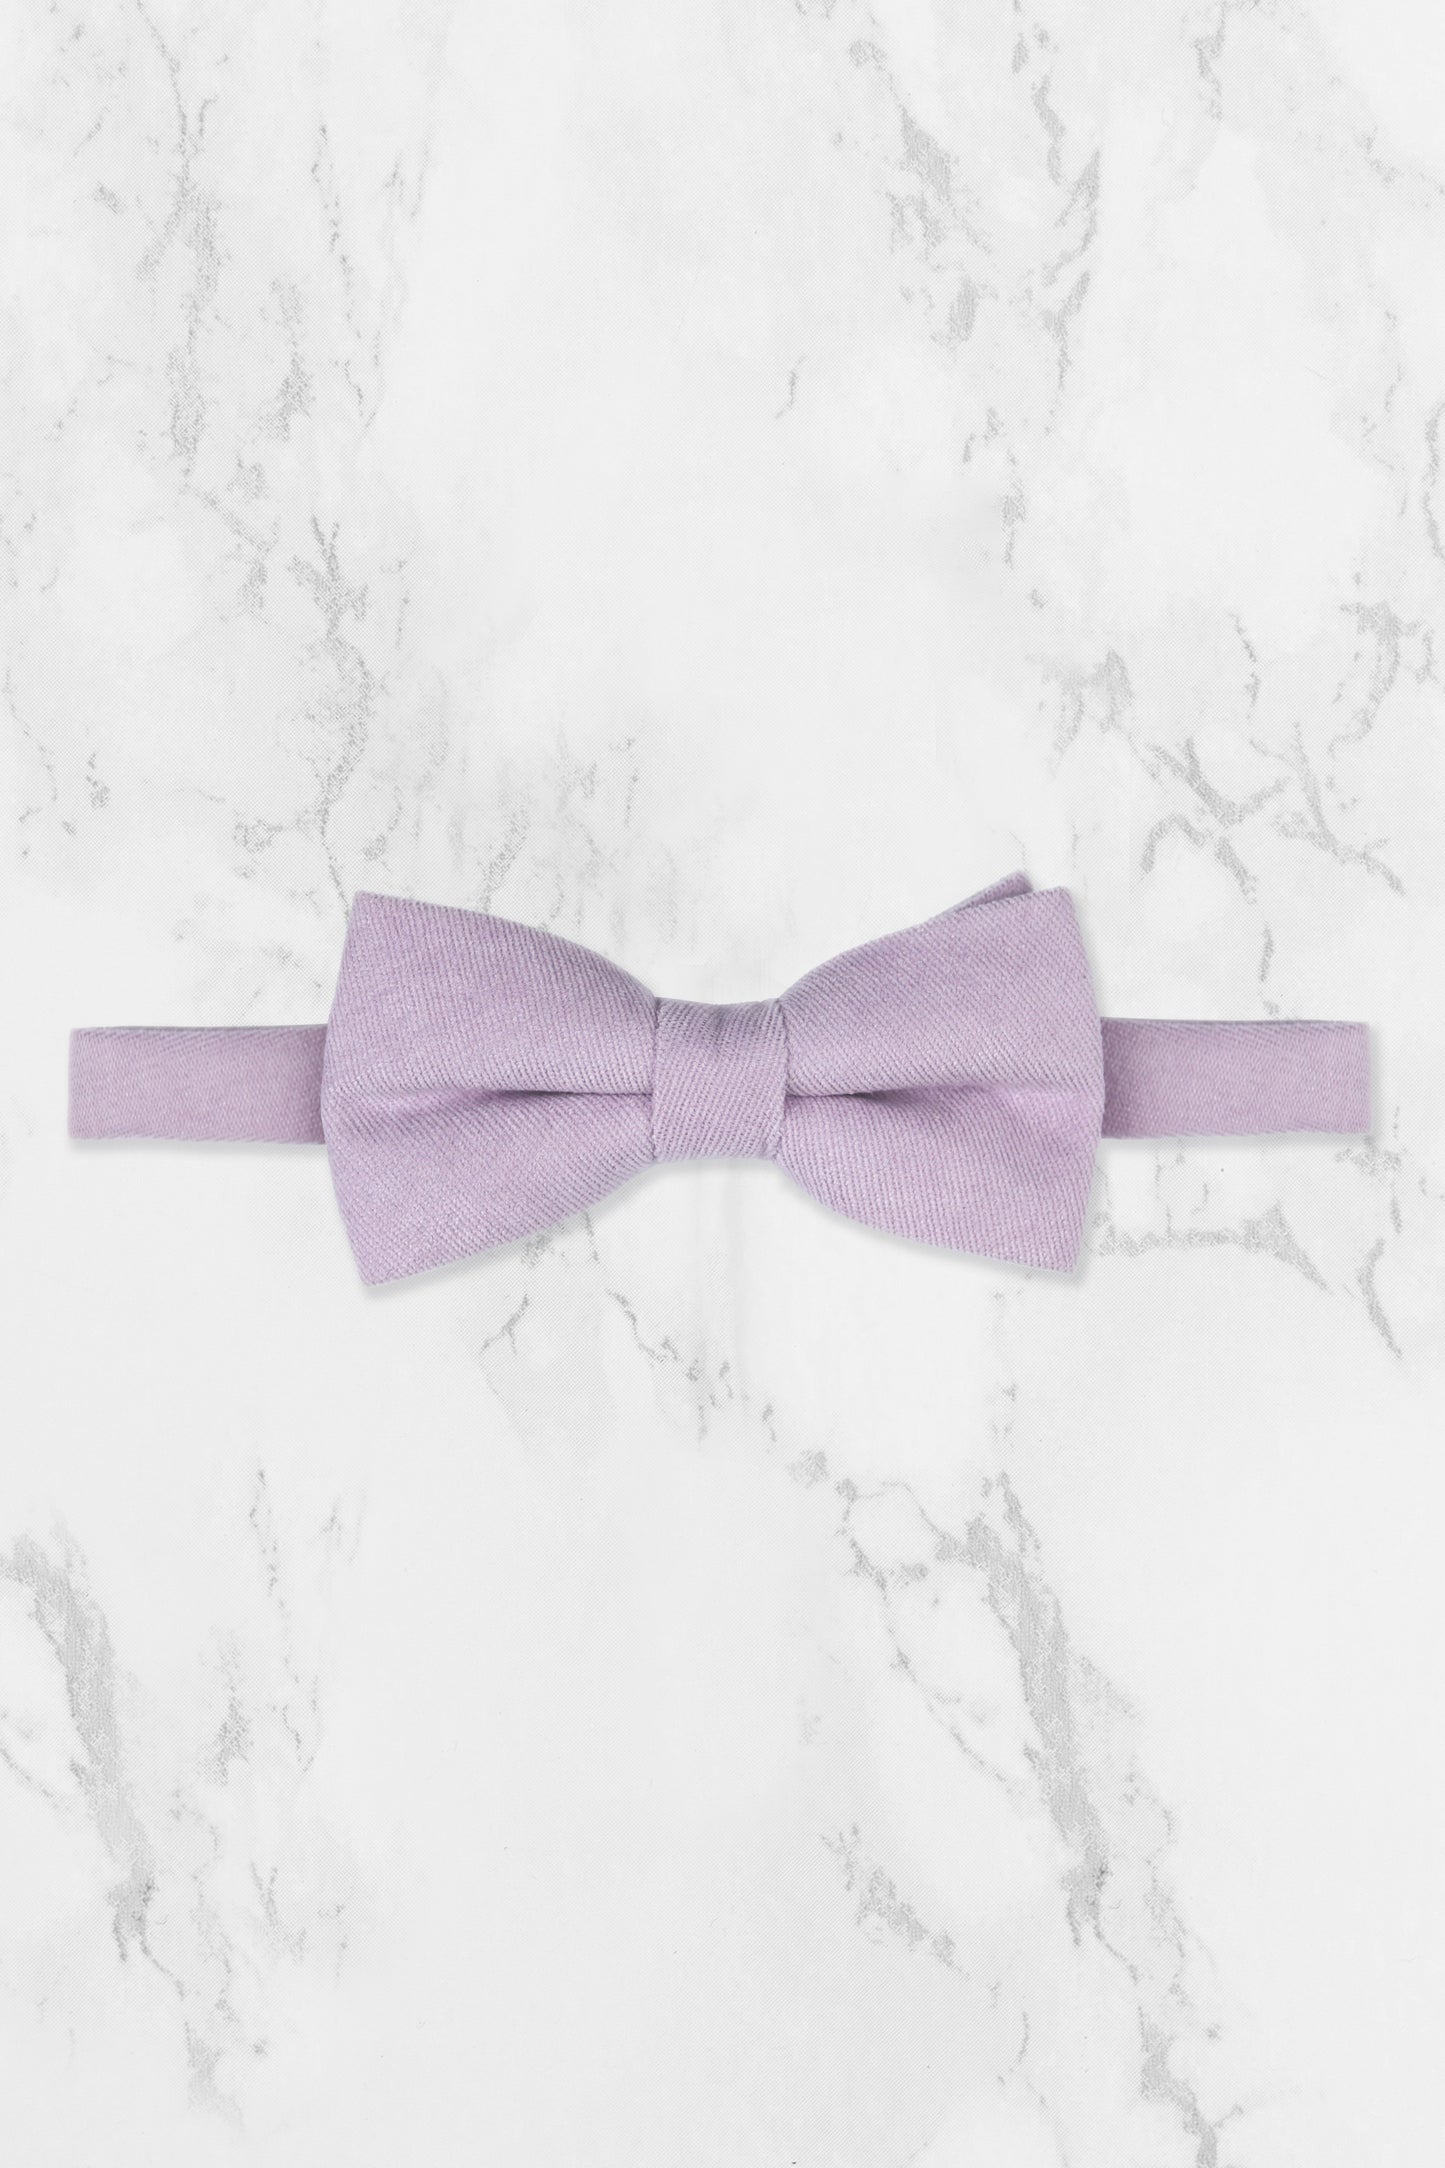 100% Brushed Cotton Suede Bow Tie - Purple